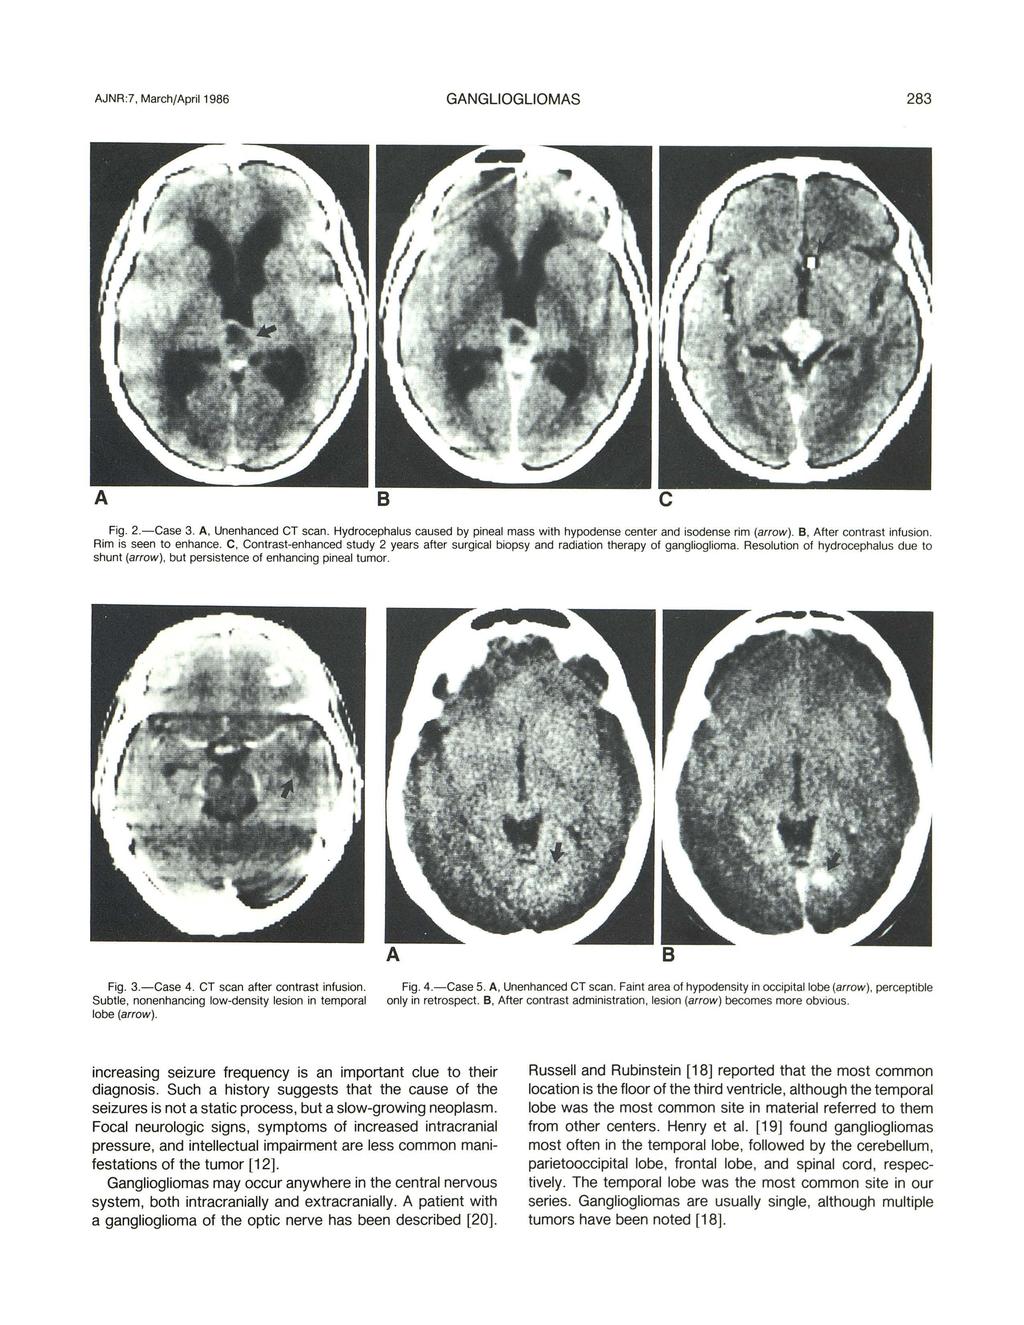 AJNR :7, March/April 1986 GANGLlOGLIOMAS 283 Fig. 2.-Case 3. A, Unenhanced CT scan. Hydrocephalus caused by pineal mass with hypodense center and isodense rim (arrow). e, After contrast infusion.